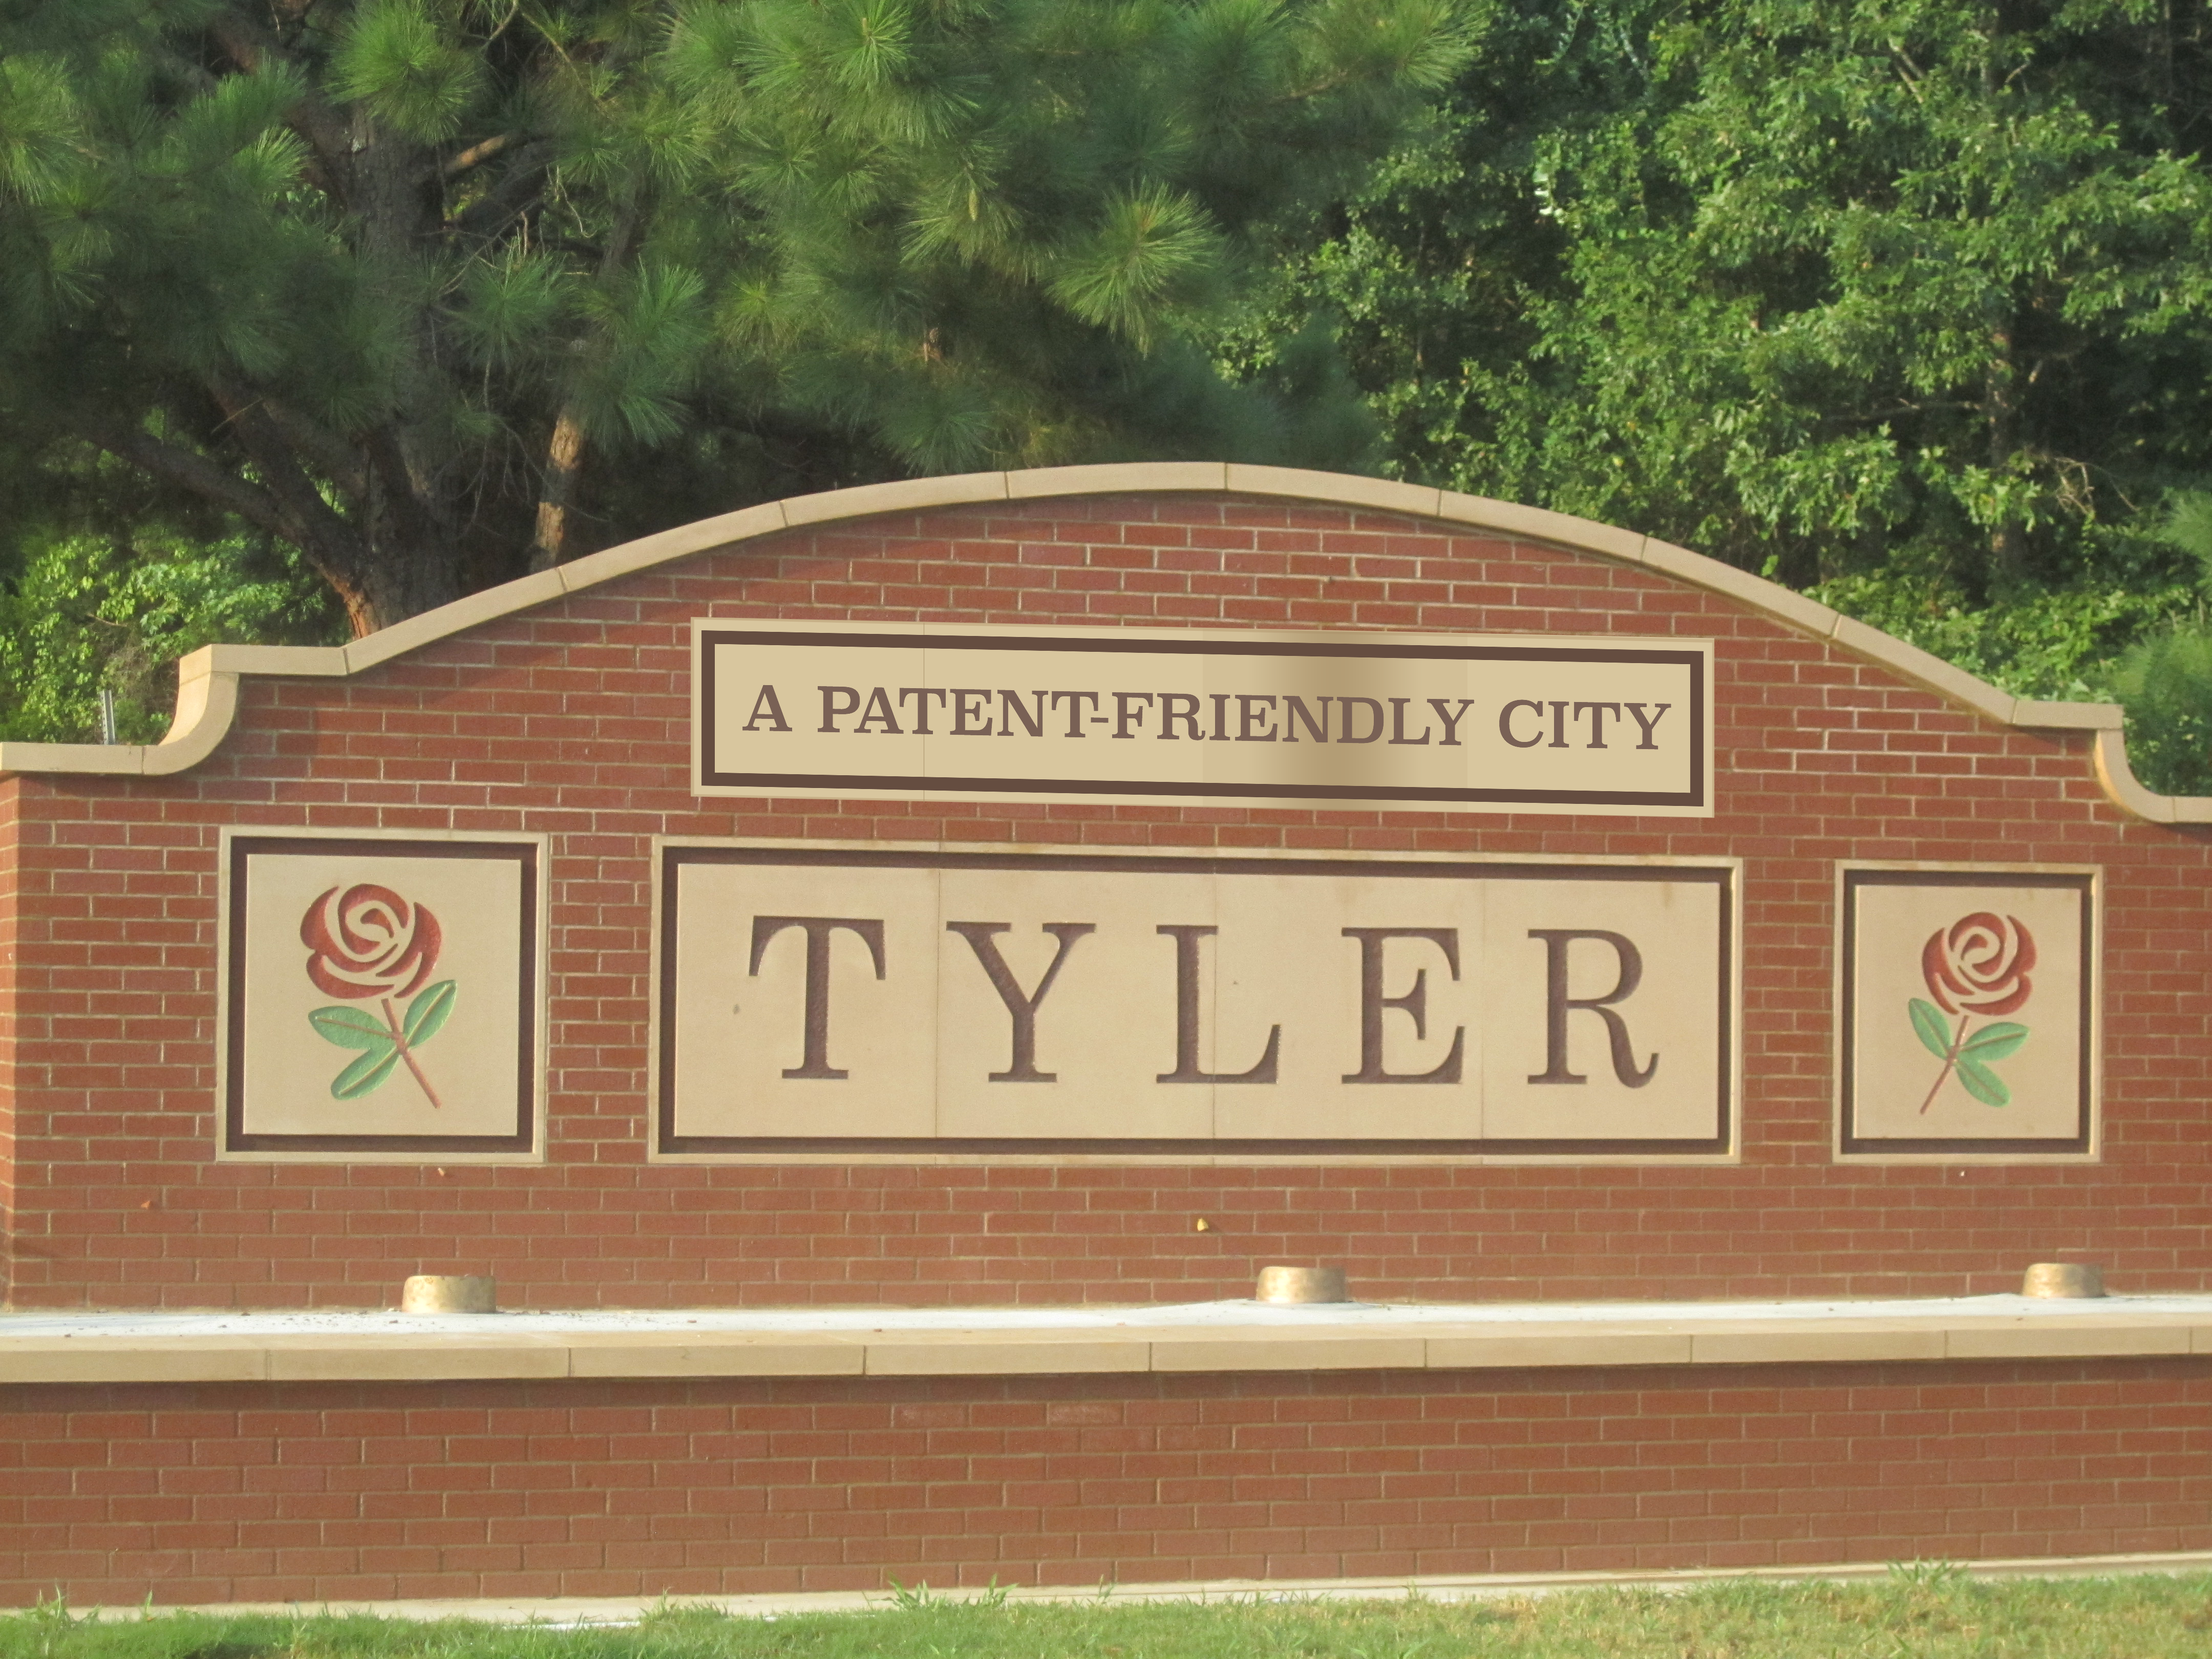 Tyler, Texas welcomes patent owners